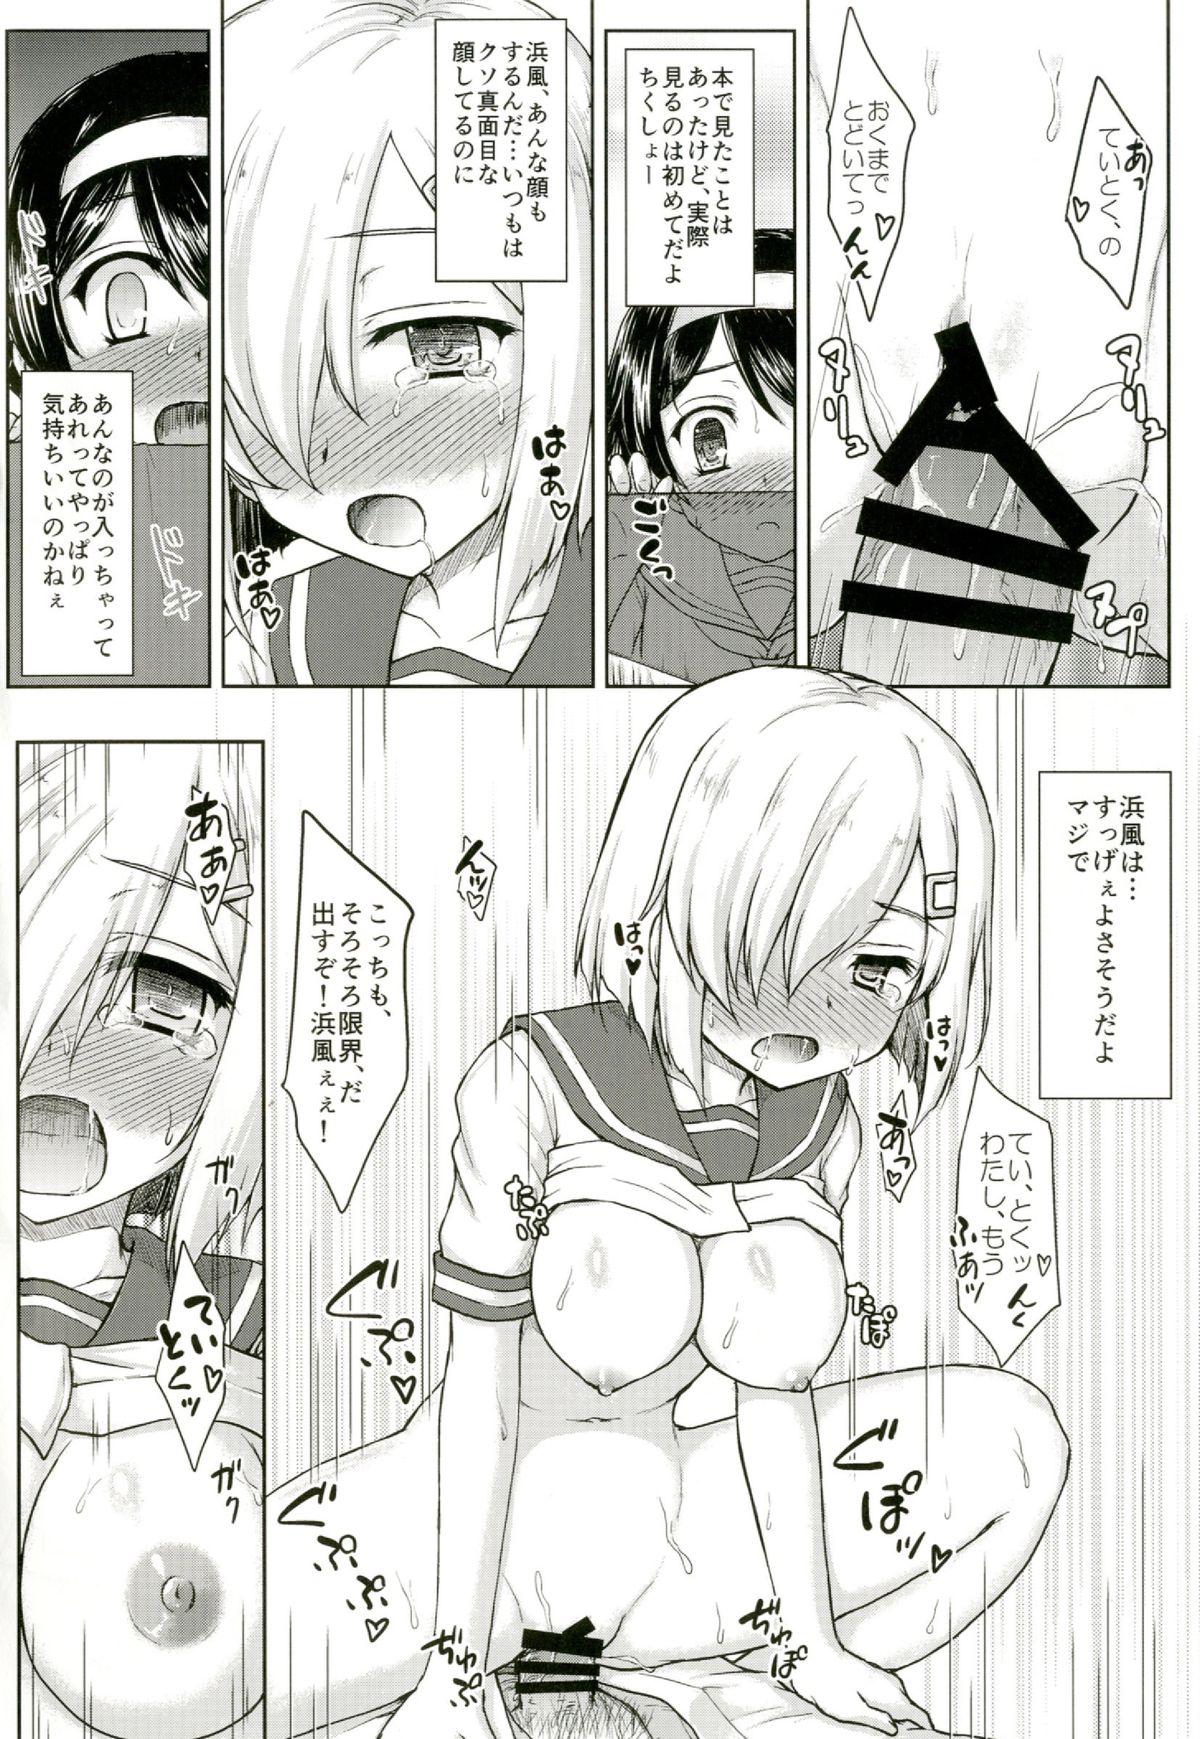 Nasty Porn Sie ist ohne Ehre! - Kantai collection Consolo - Page 5